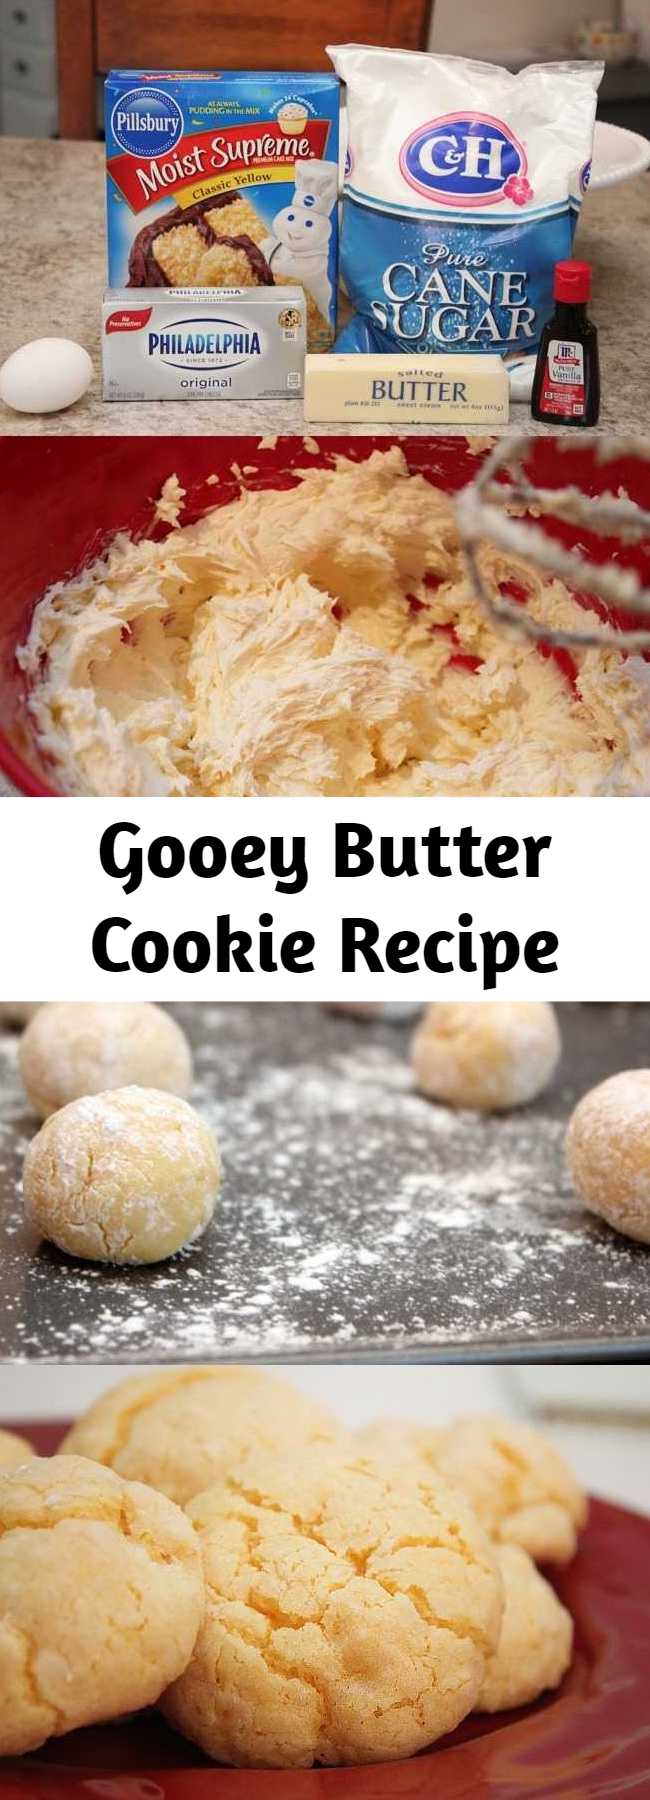 Gooey Butter Cookie Recipe - Gooey Butter Cookie's are absolutely delicious!  These cookies stay super light and fluffy and have a sweet vanilla taste.